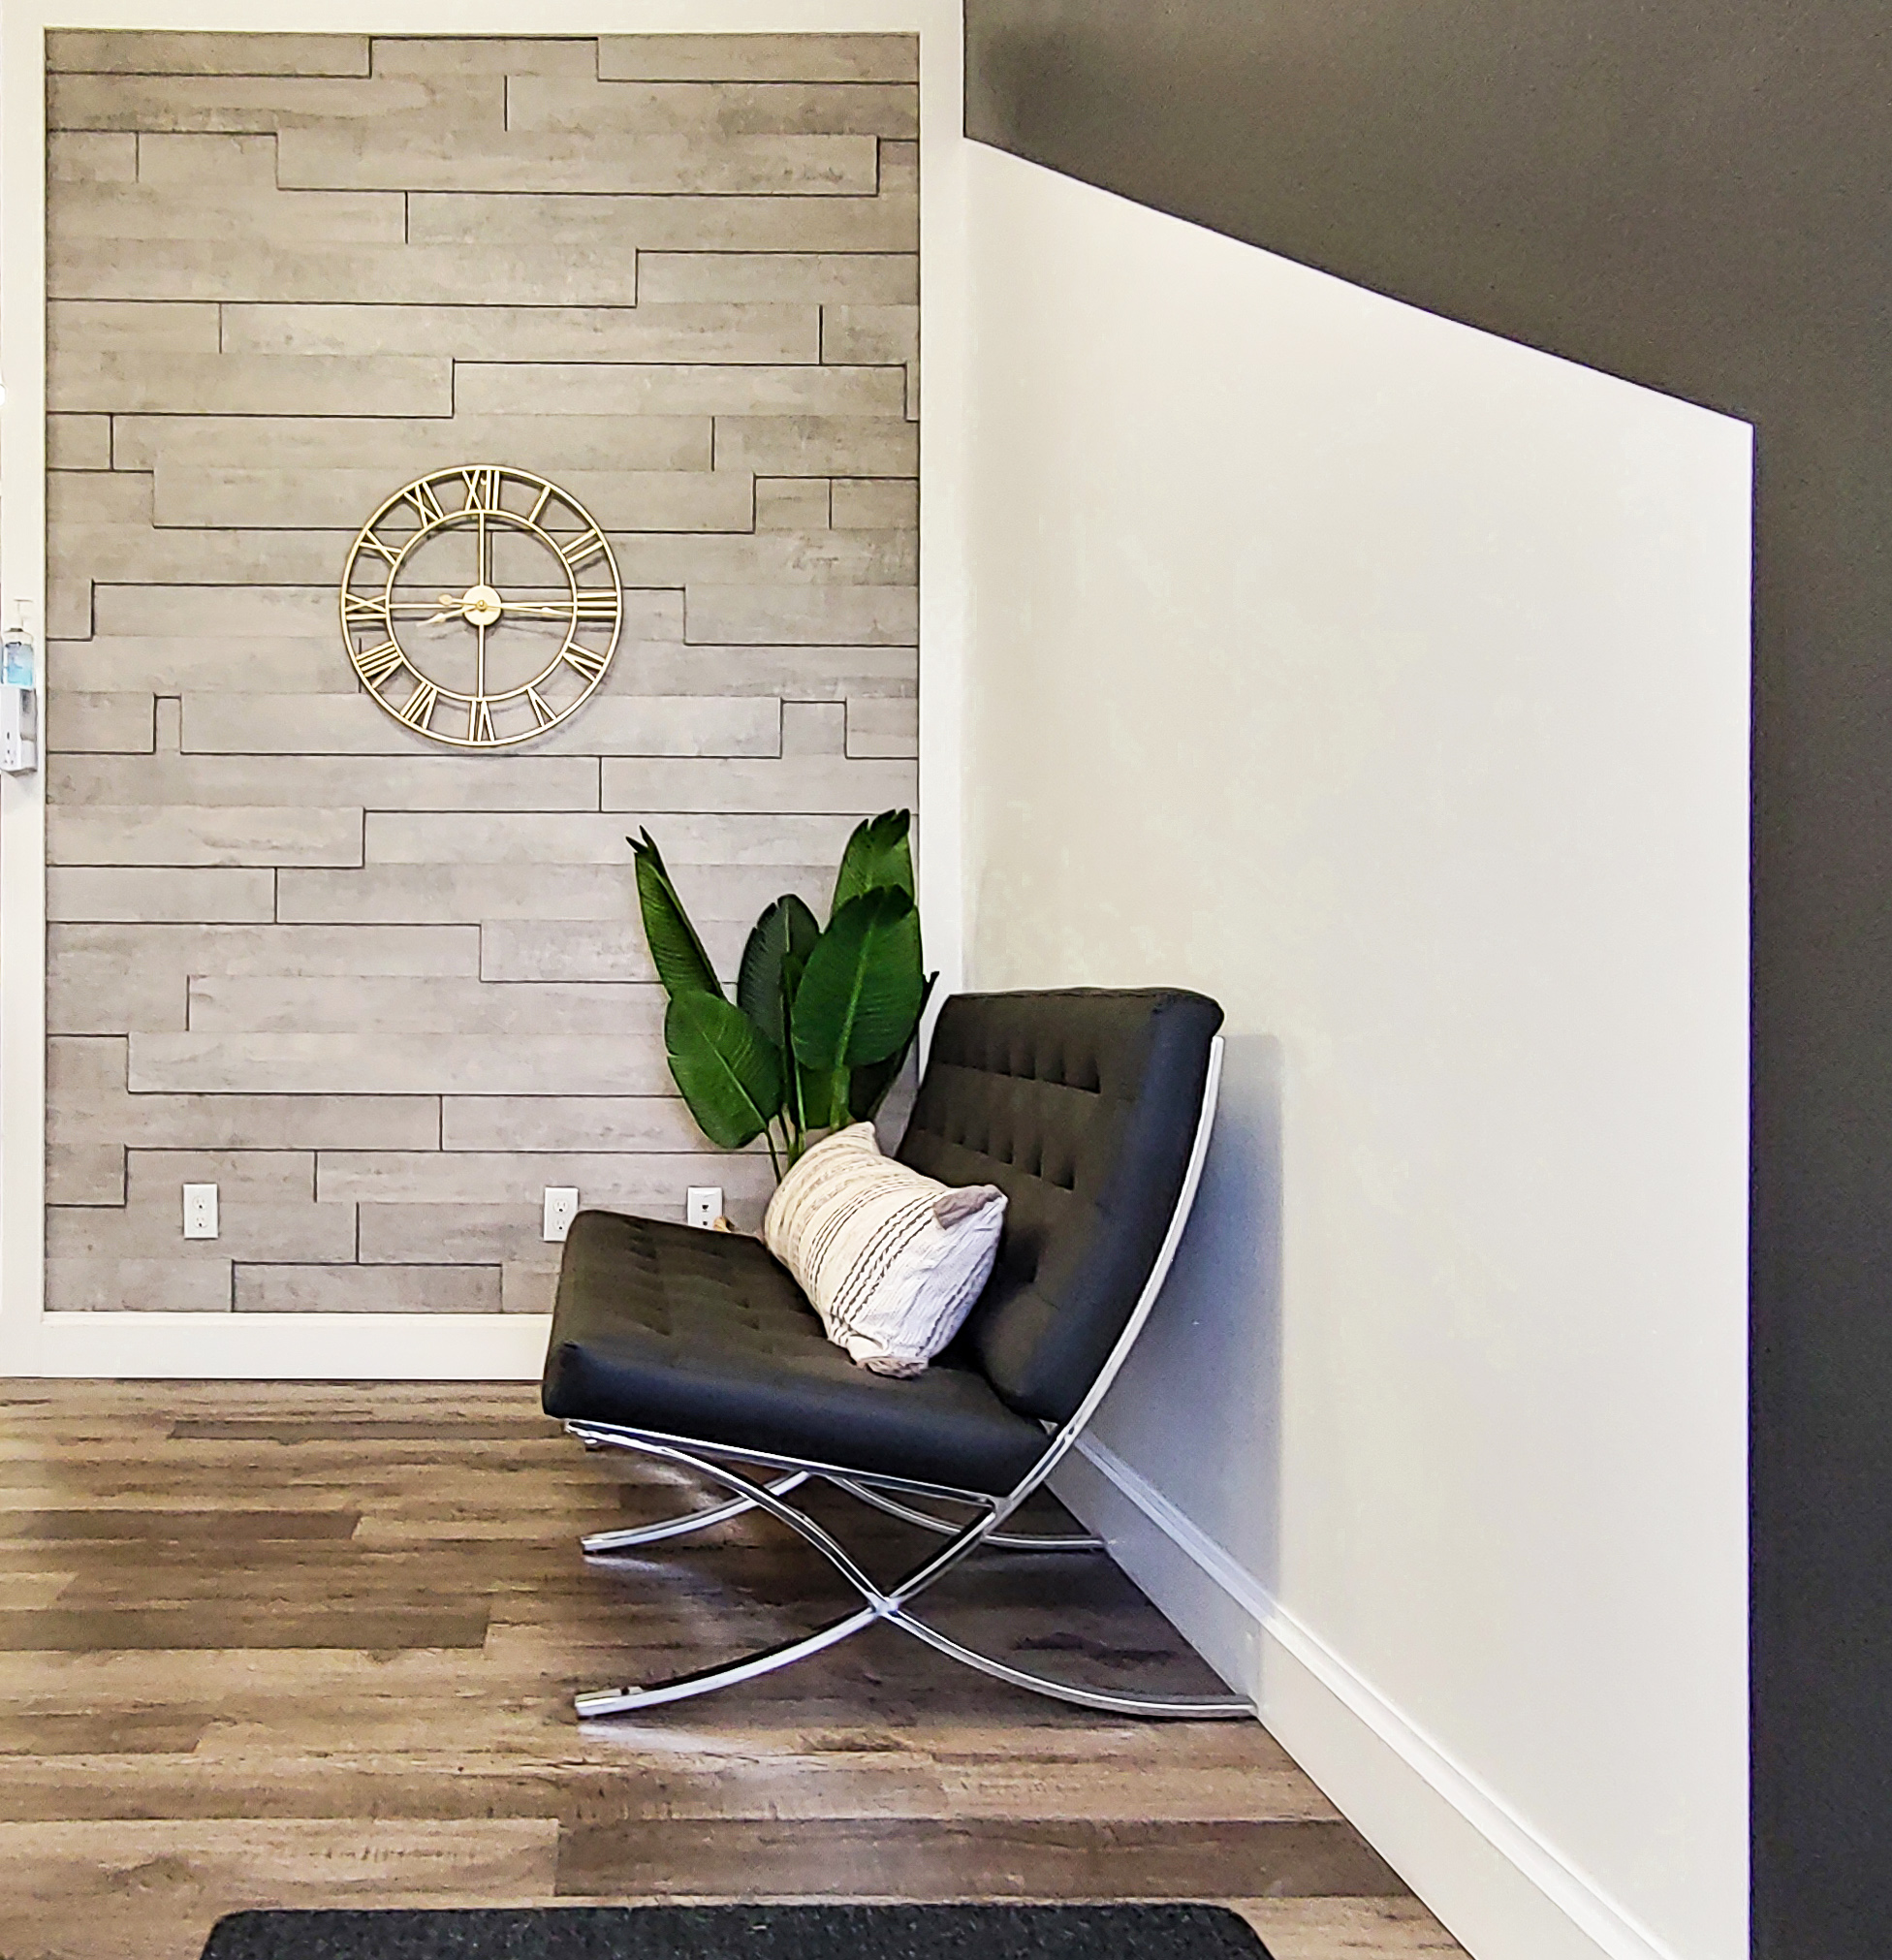 New front office space with wide plank hardwood floors, stone tile walls, potted palm plant, and a modern grey bench.